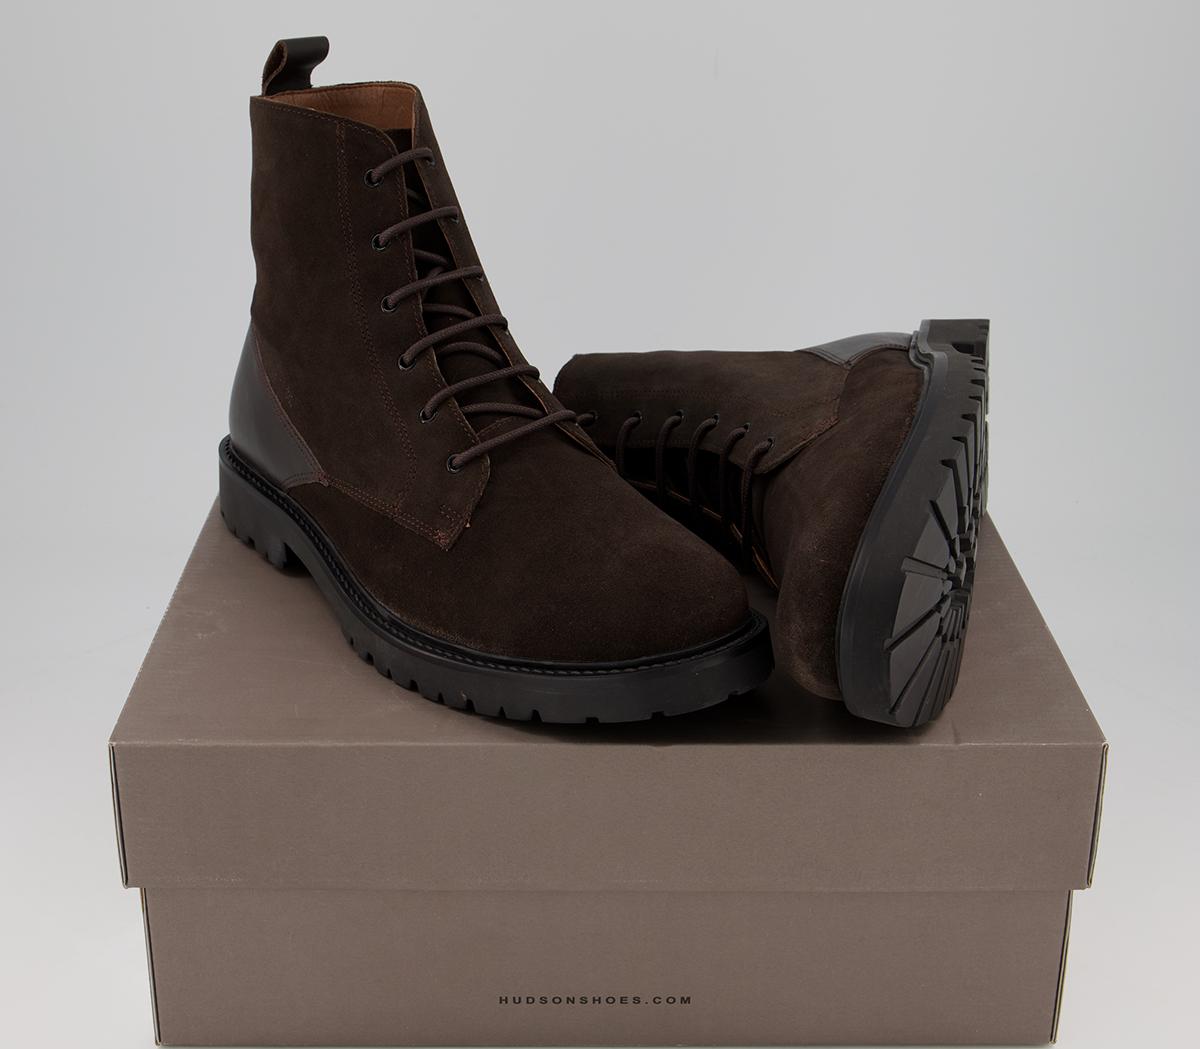 Hudson London Perry Suede Boots Brown Suede Mens Boots 8447